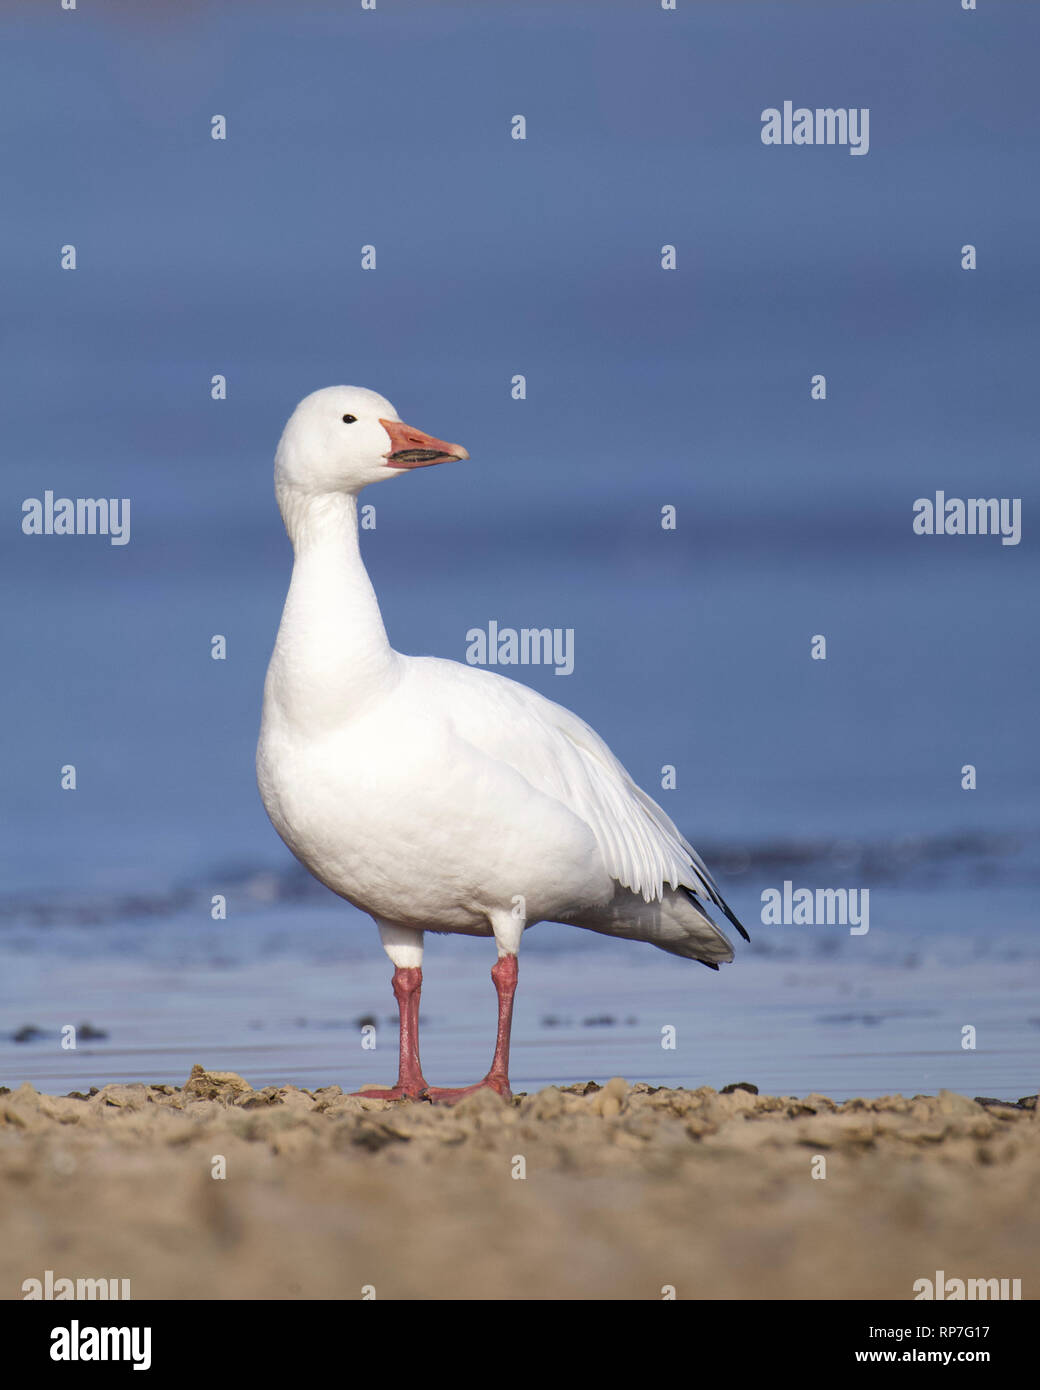 Snow Goose posing majestically on the shore of an ice covered frozen lake in winter Stock Photo